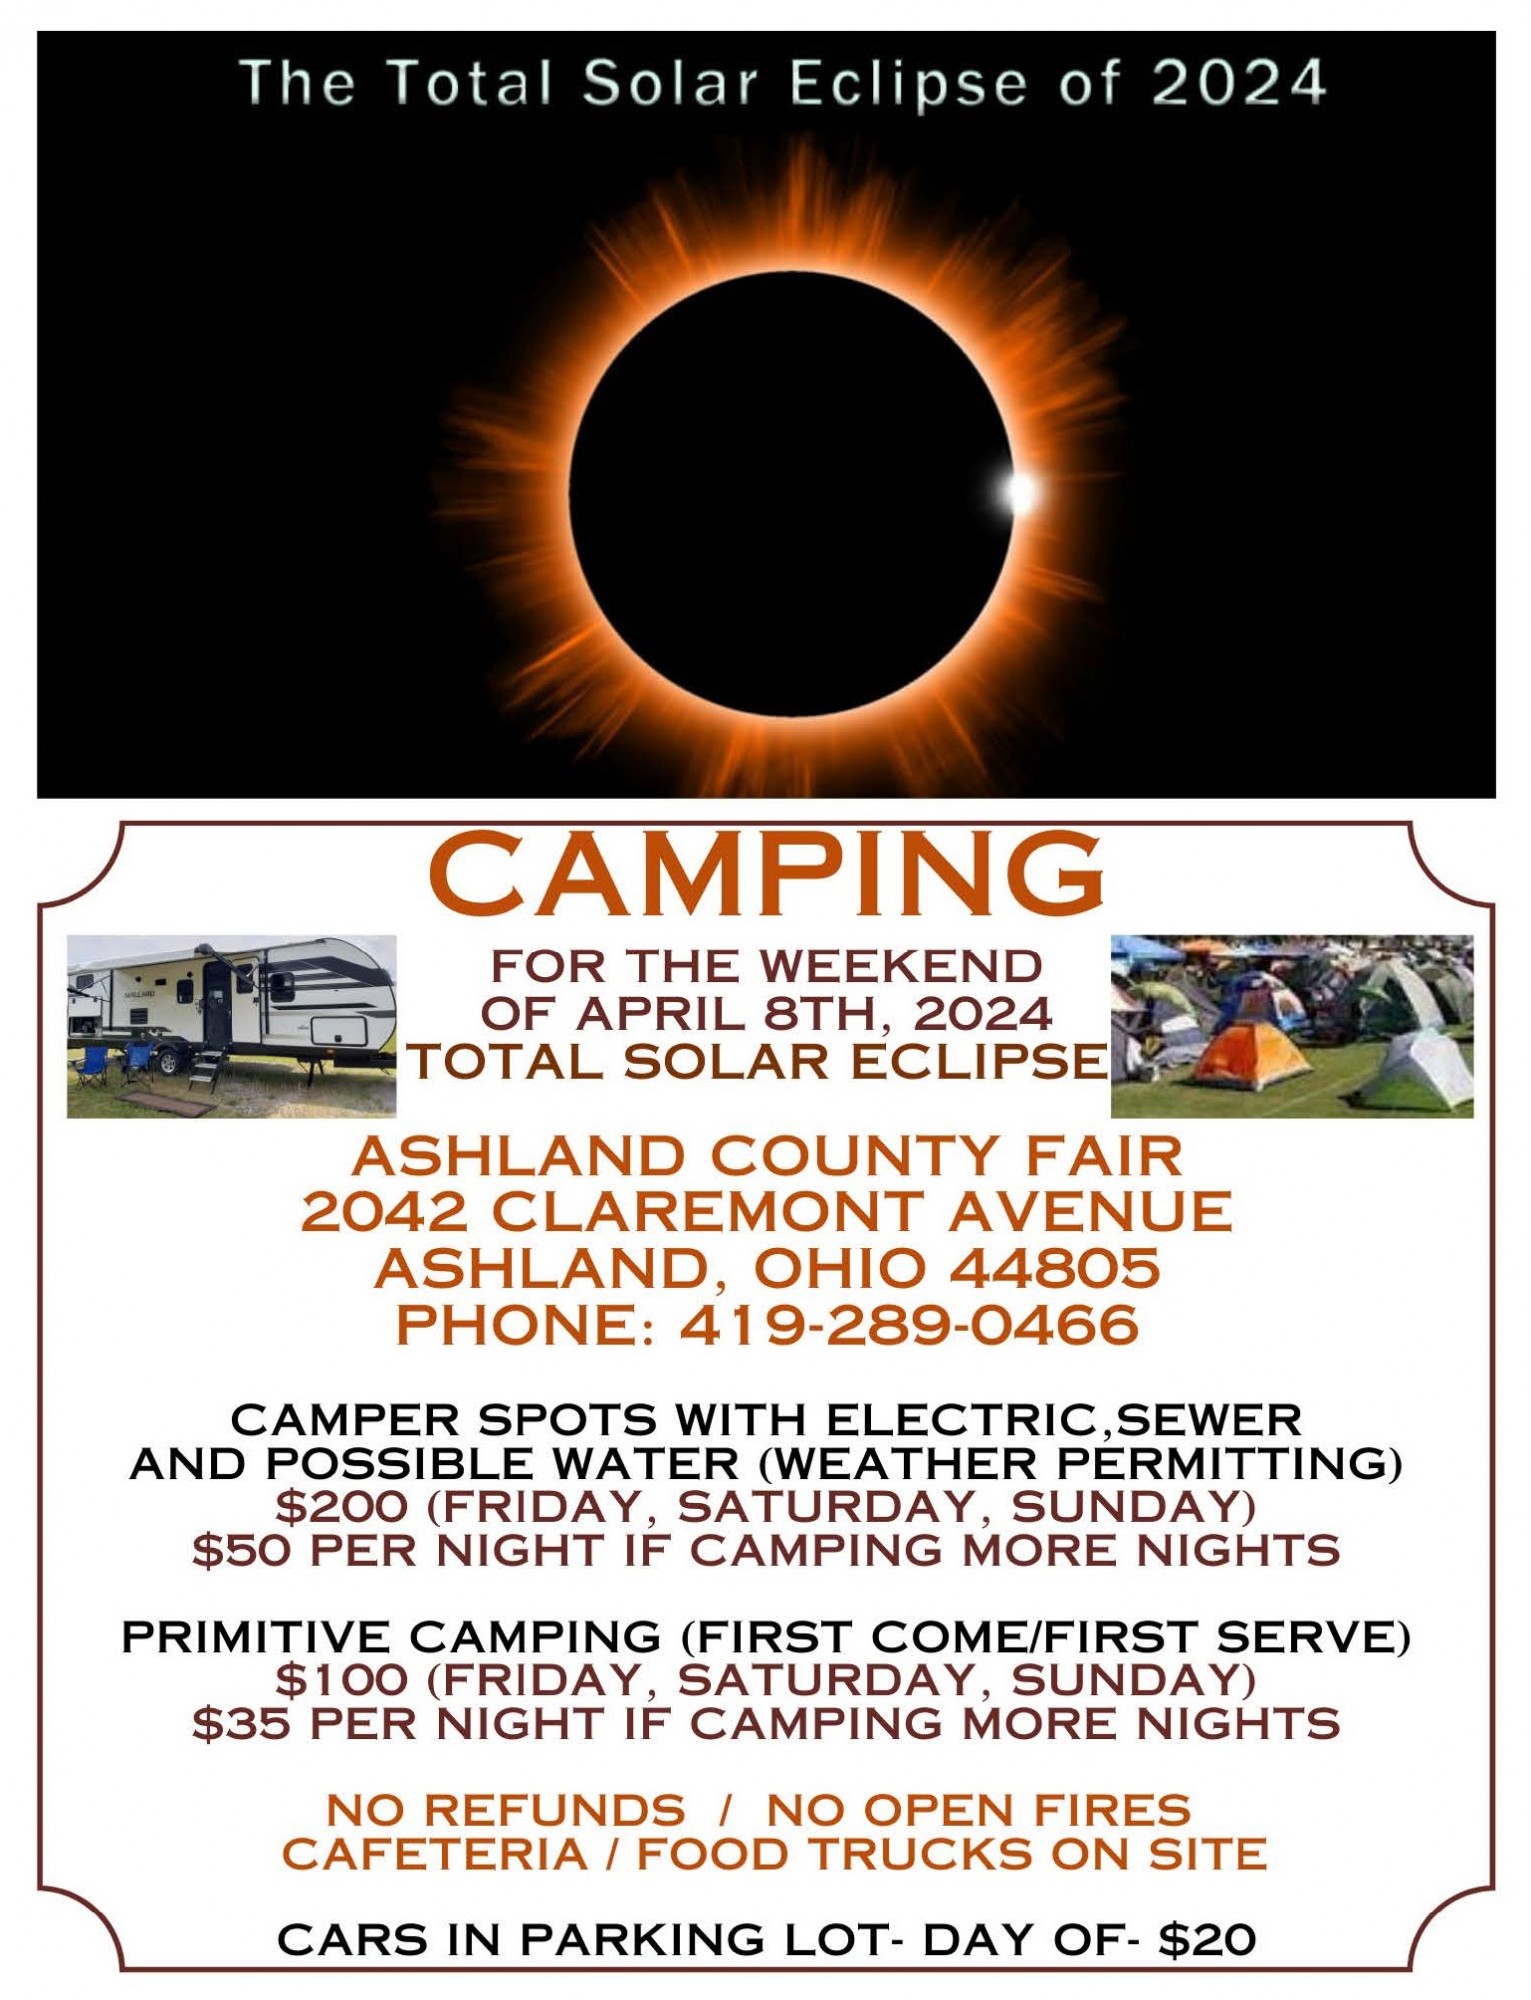 Camping - Solar Eclipse